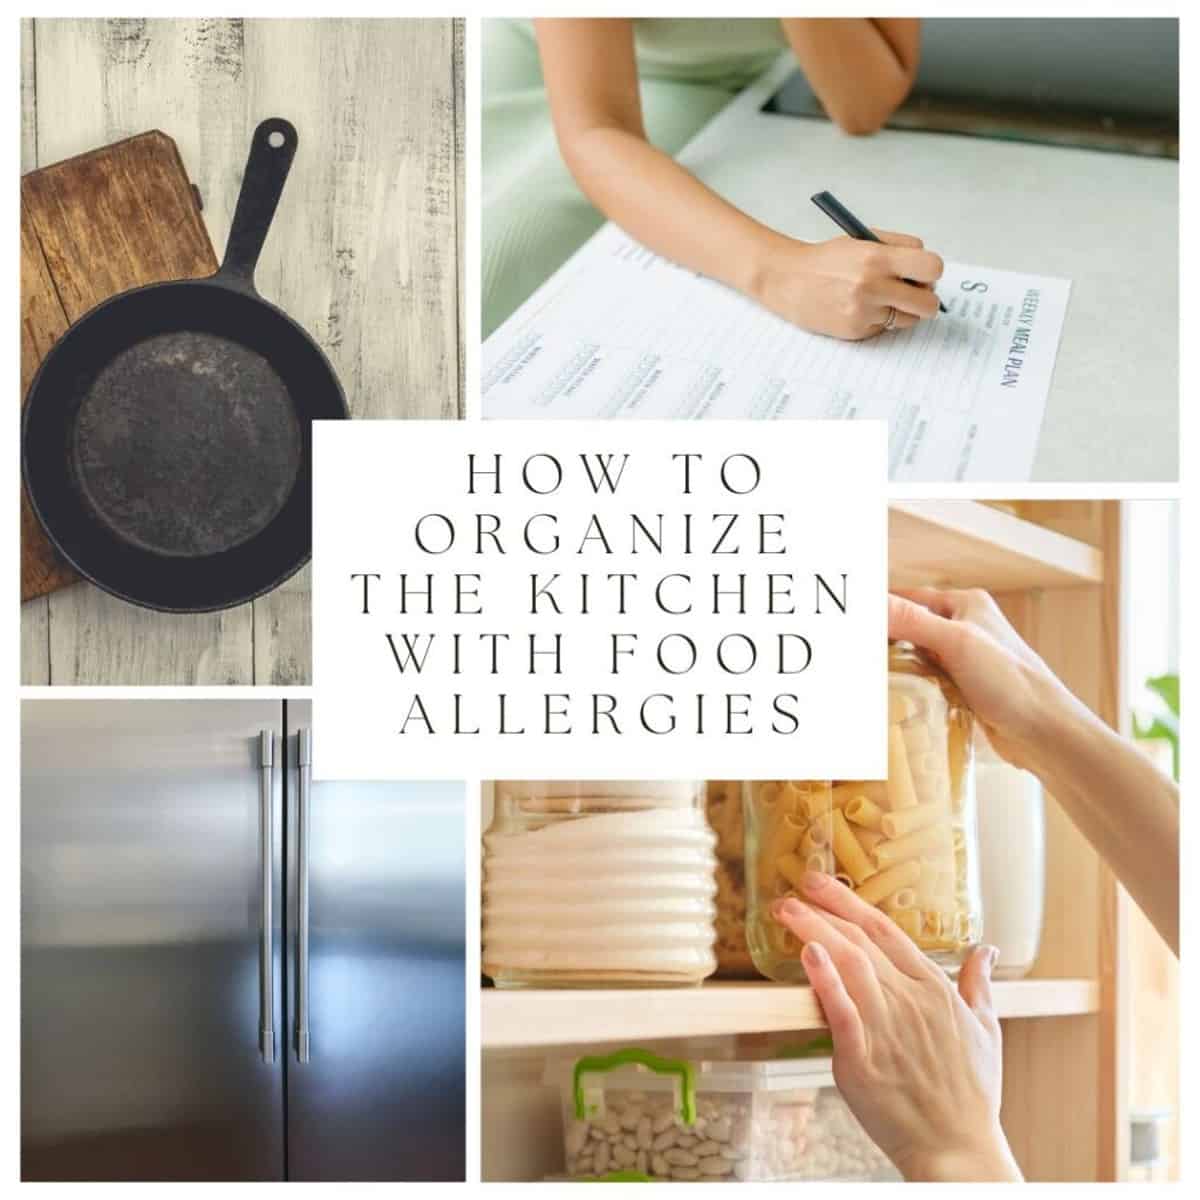 how to organize the kitchen with food allergies A kitchen pantry with shelves labeled for different food allergens, such as peanuts, tree nuts, wheat, dairy, soy, eggs, and fish.